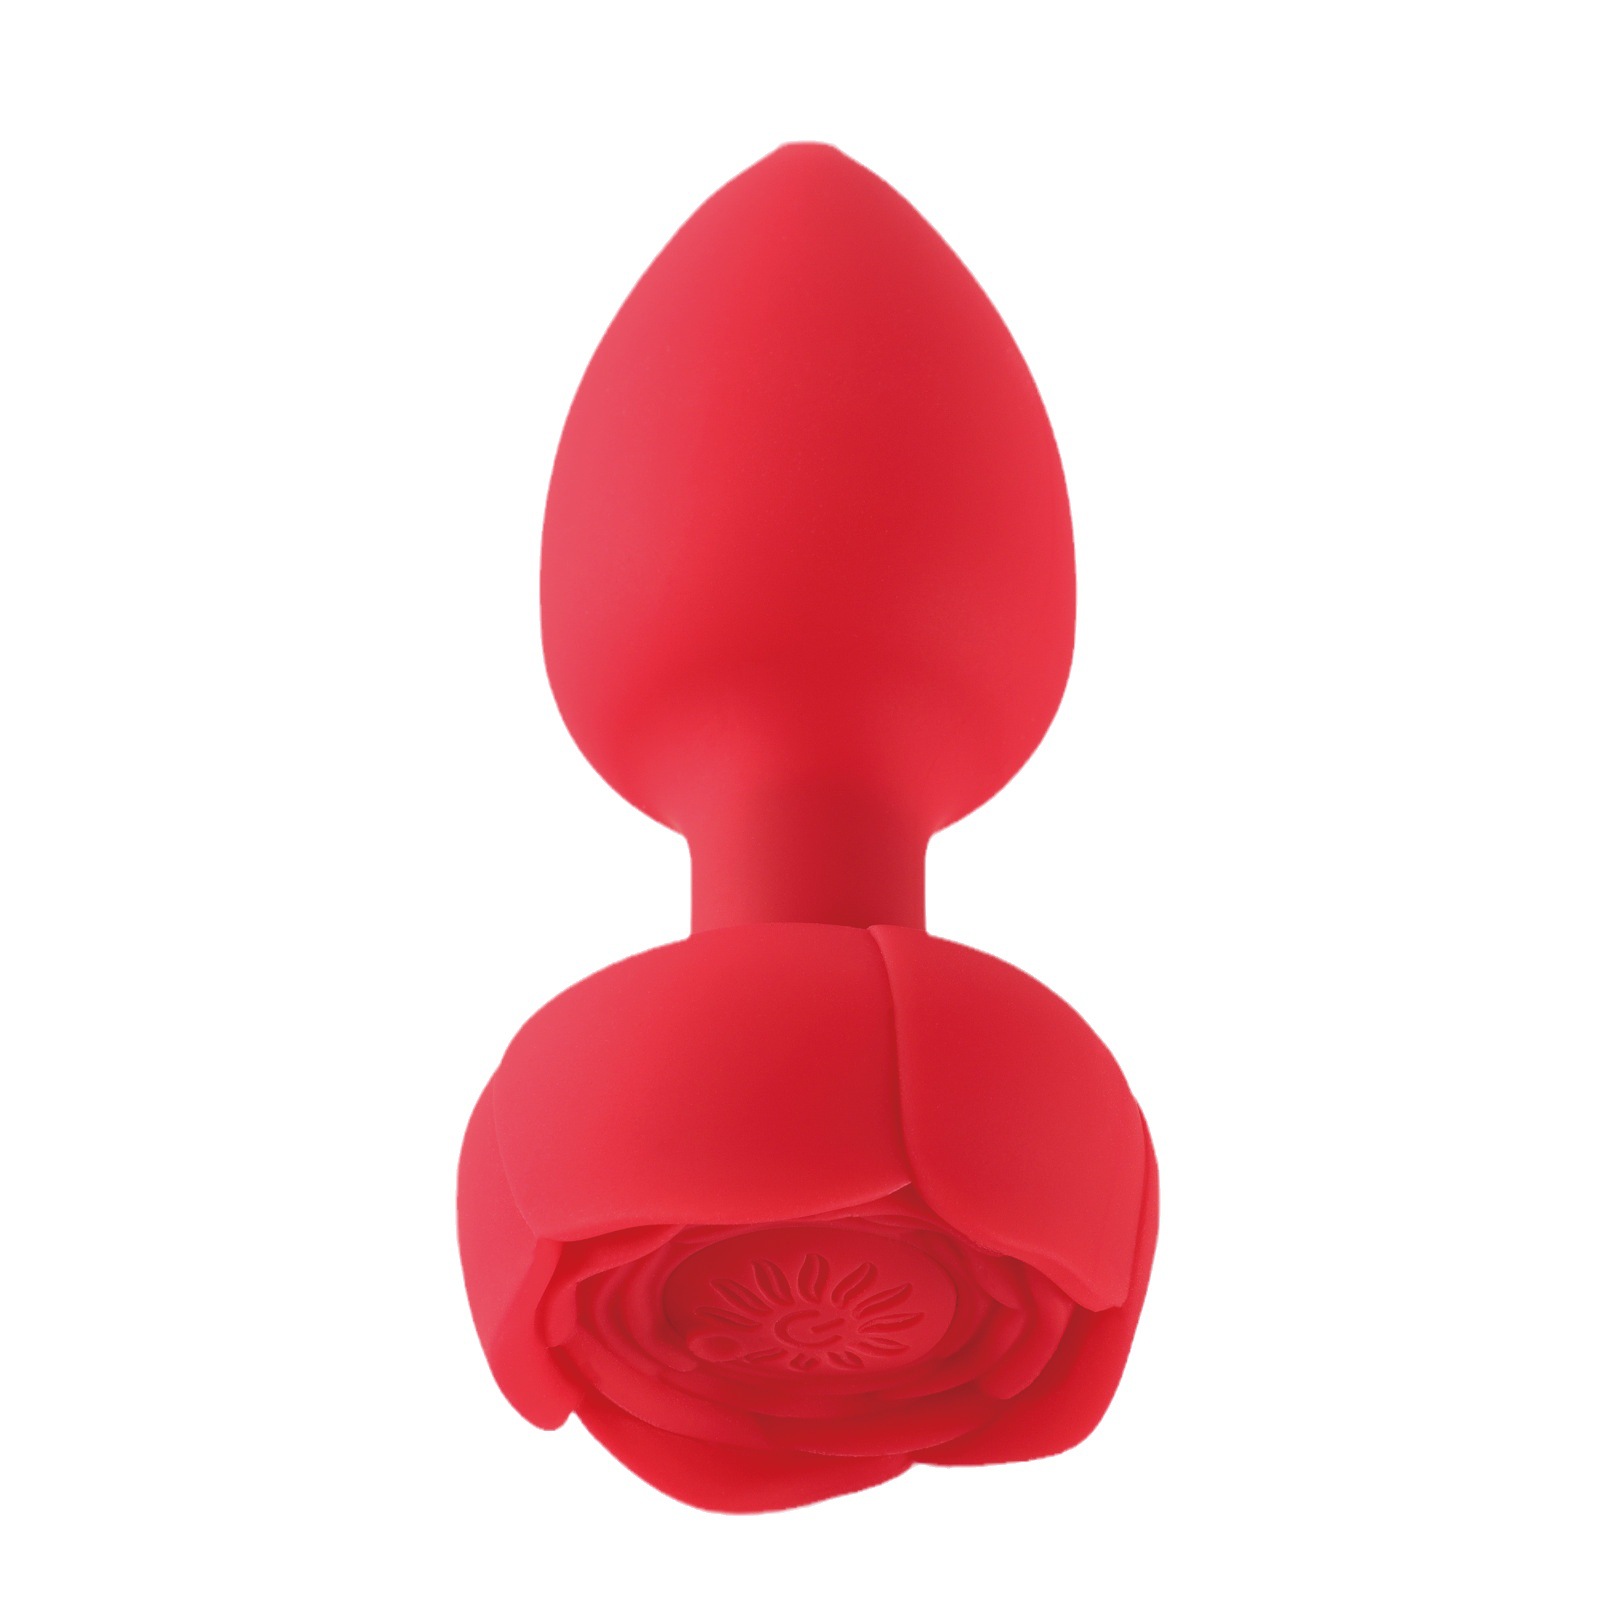 9.Red--Colorful glowing Adult Sex Toys